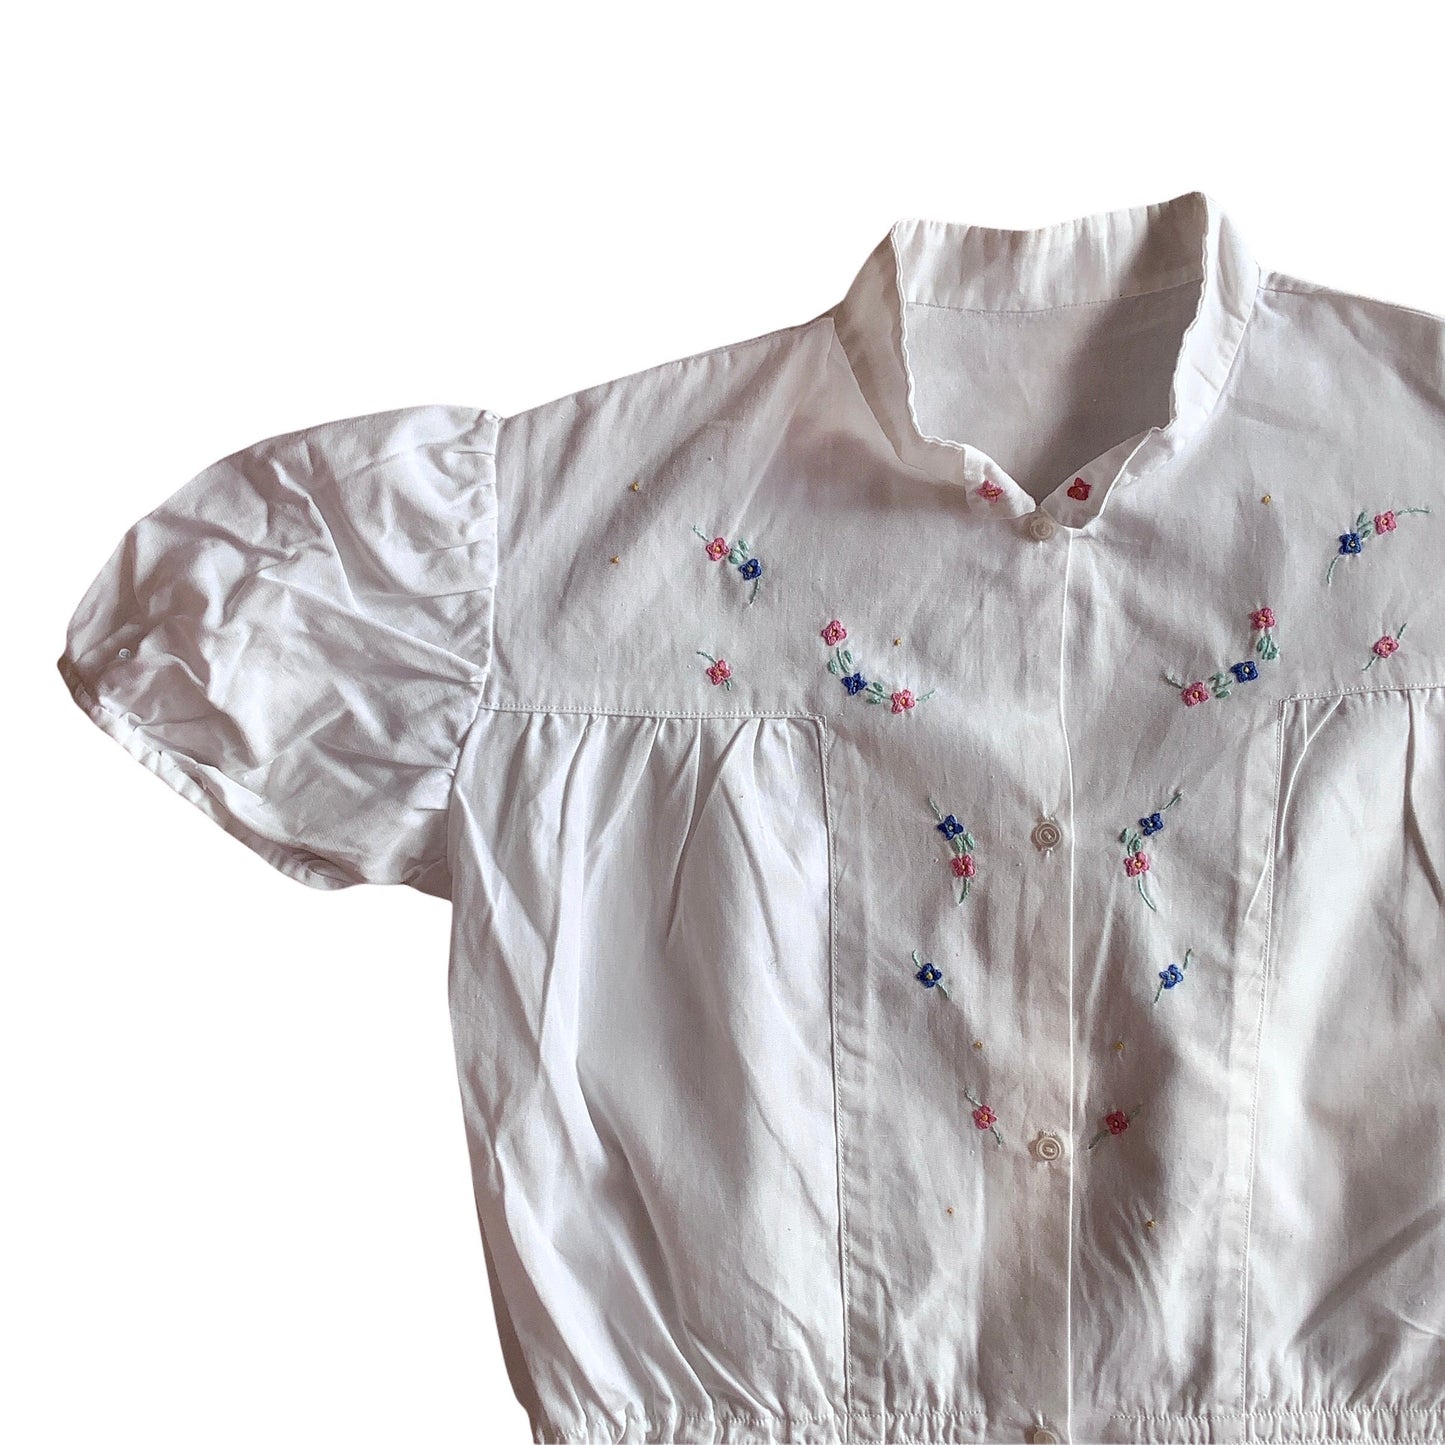 Vintage 1960's White Embroidered Top / 6-8 Years